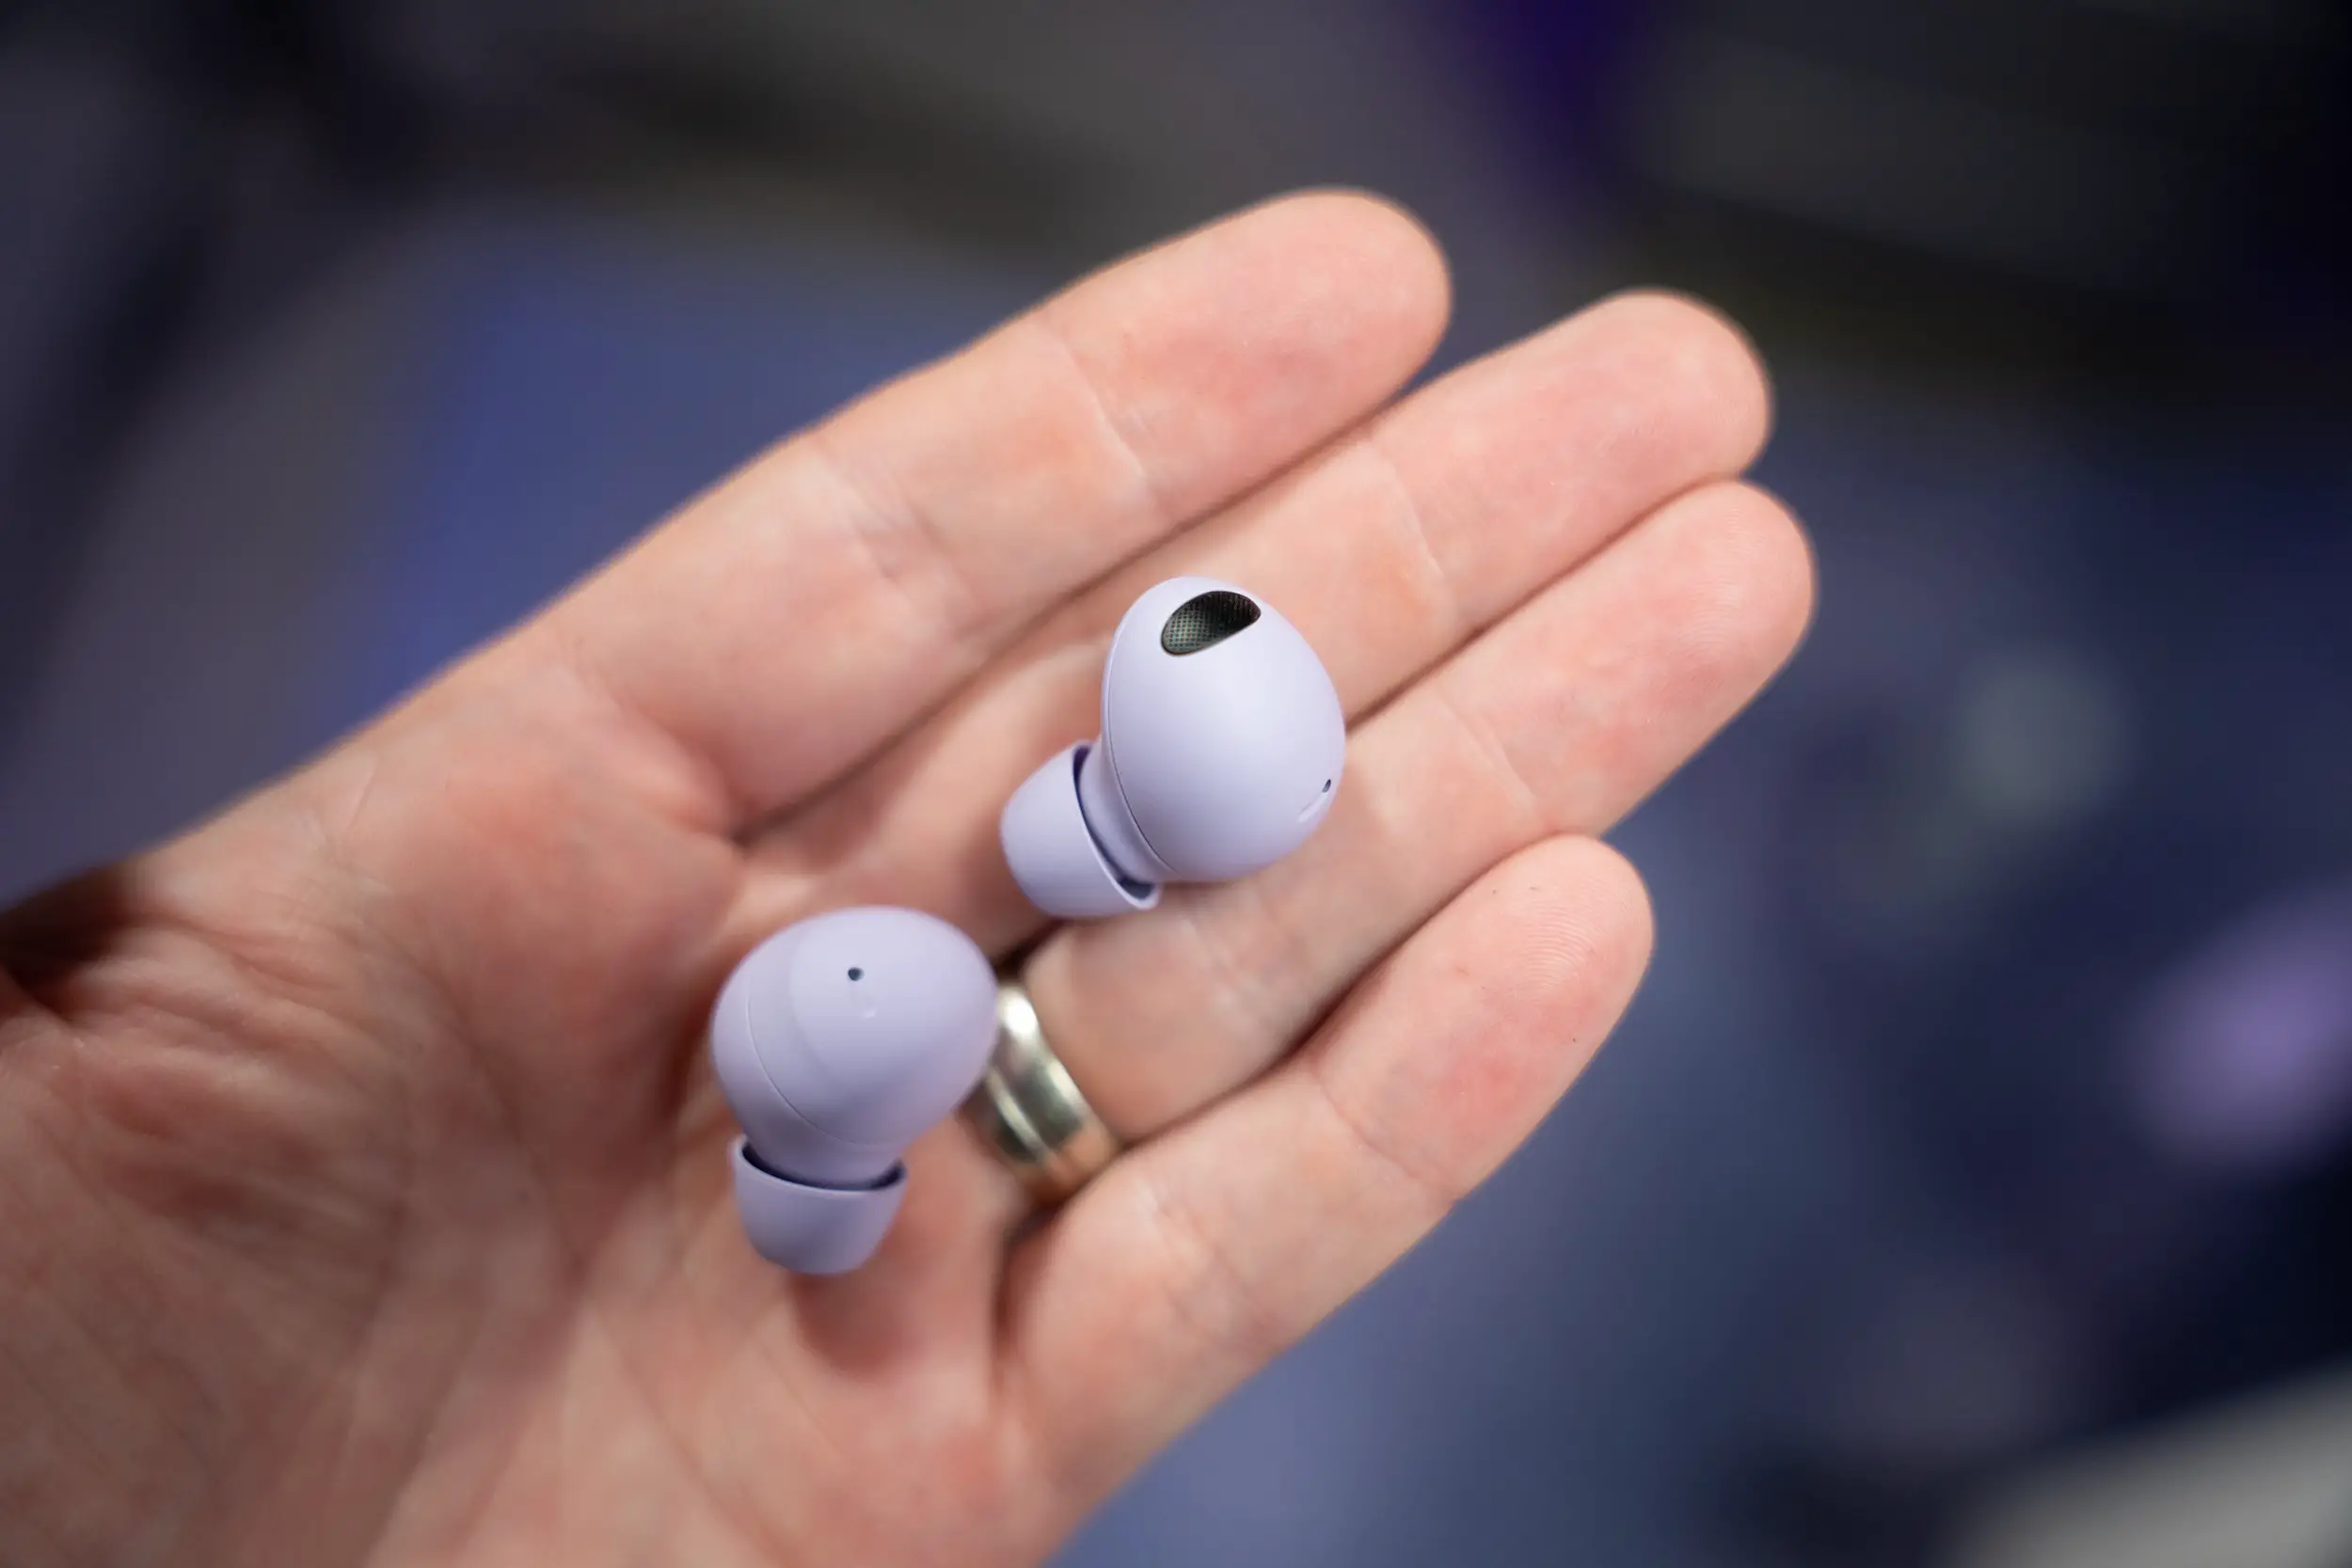 Samsung Galaxy Buds pro - Cell phones & accessories